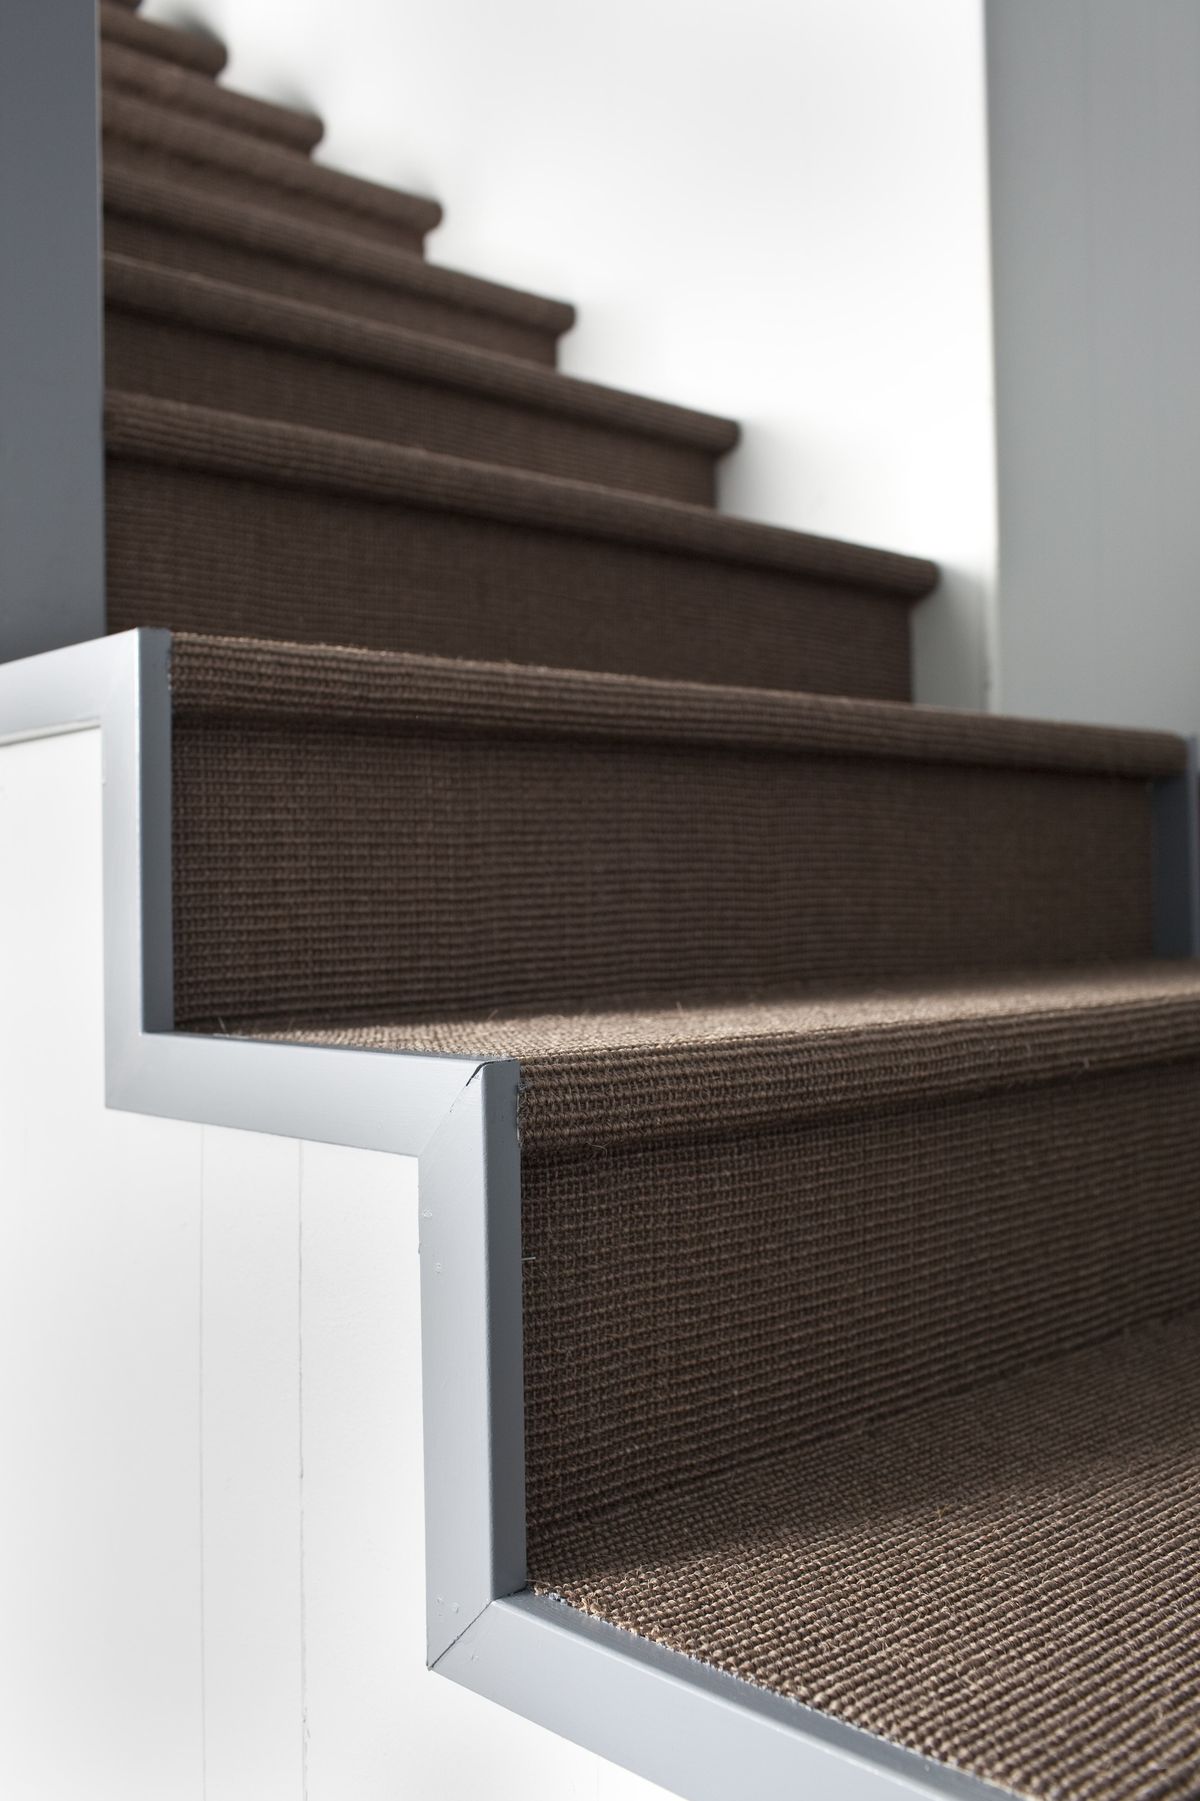 Brian Patrick Flynn’s design of a basement staircase includes organic elements such as sisal for a warm, welcoming feeling.